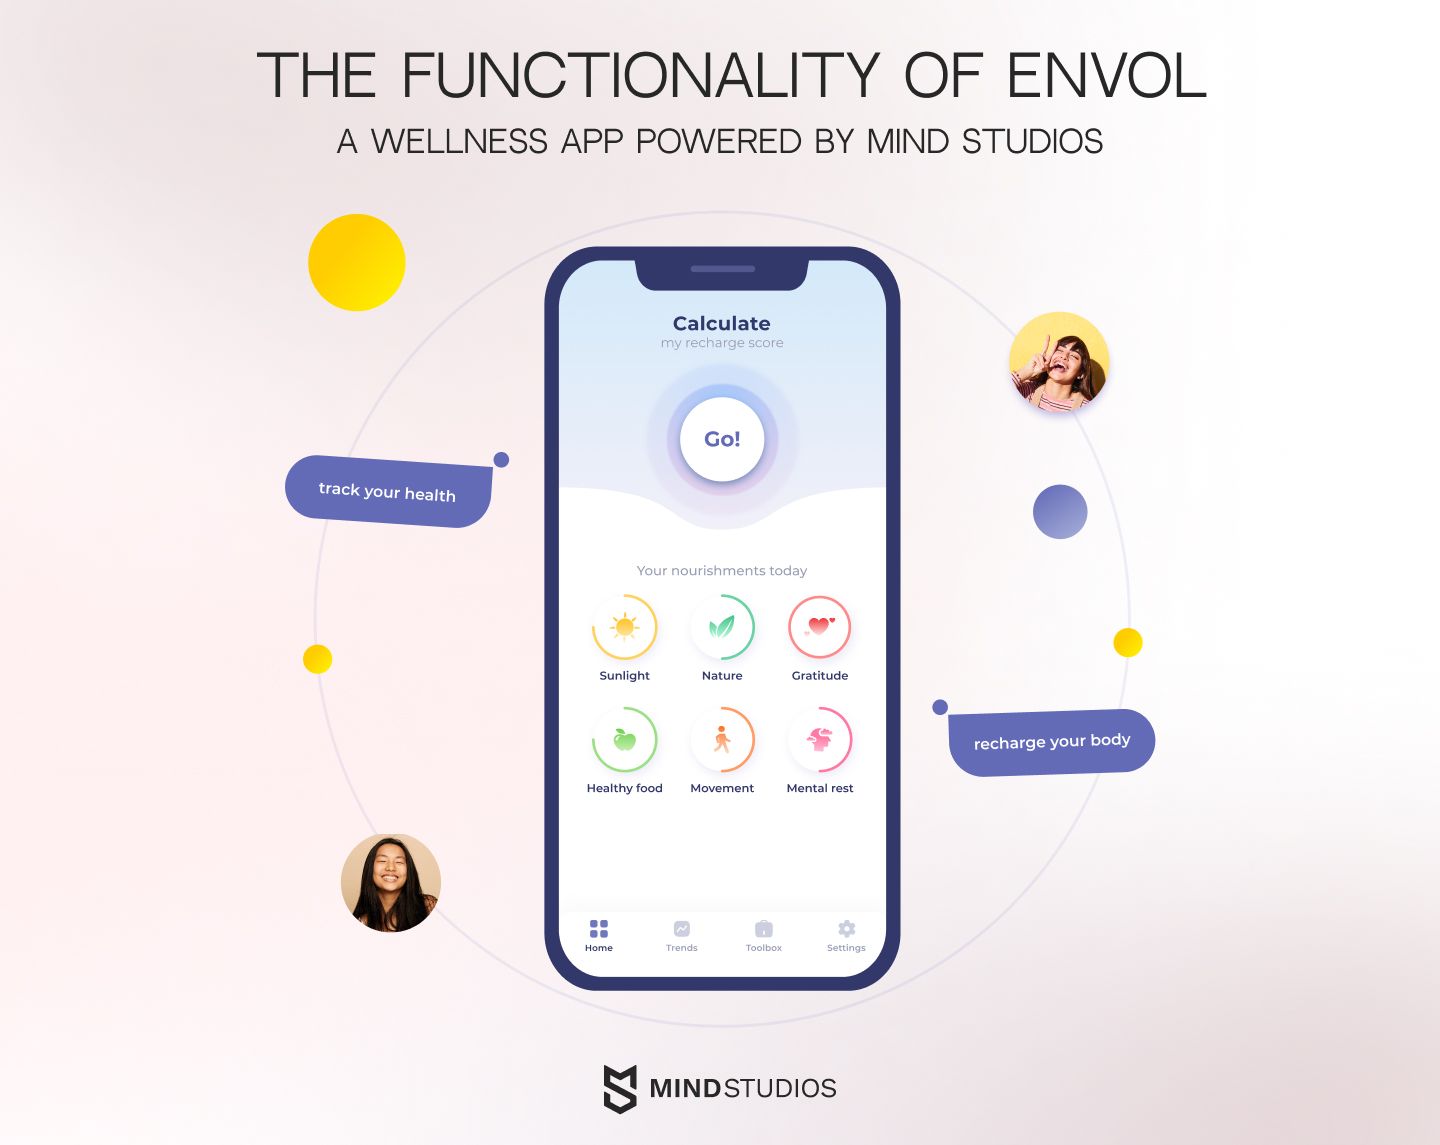 The functionality of Envol - a healthcare app powered by Mind Studios